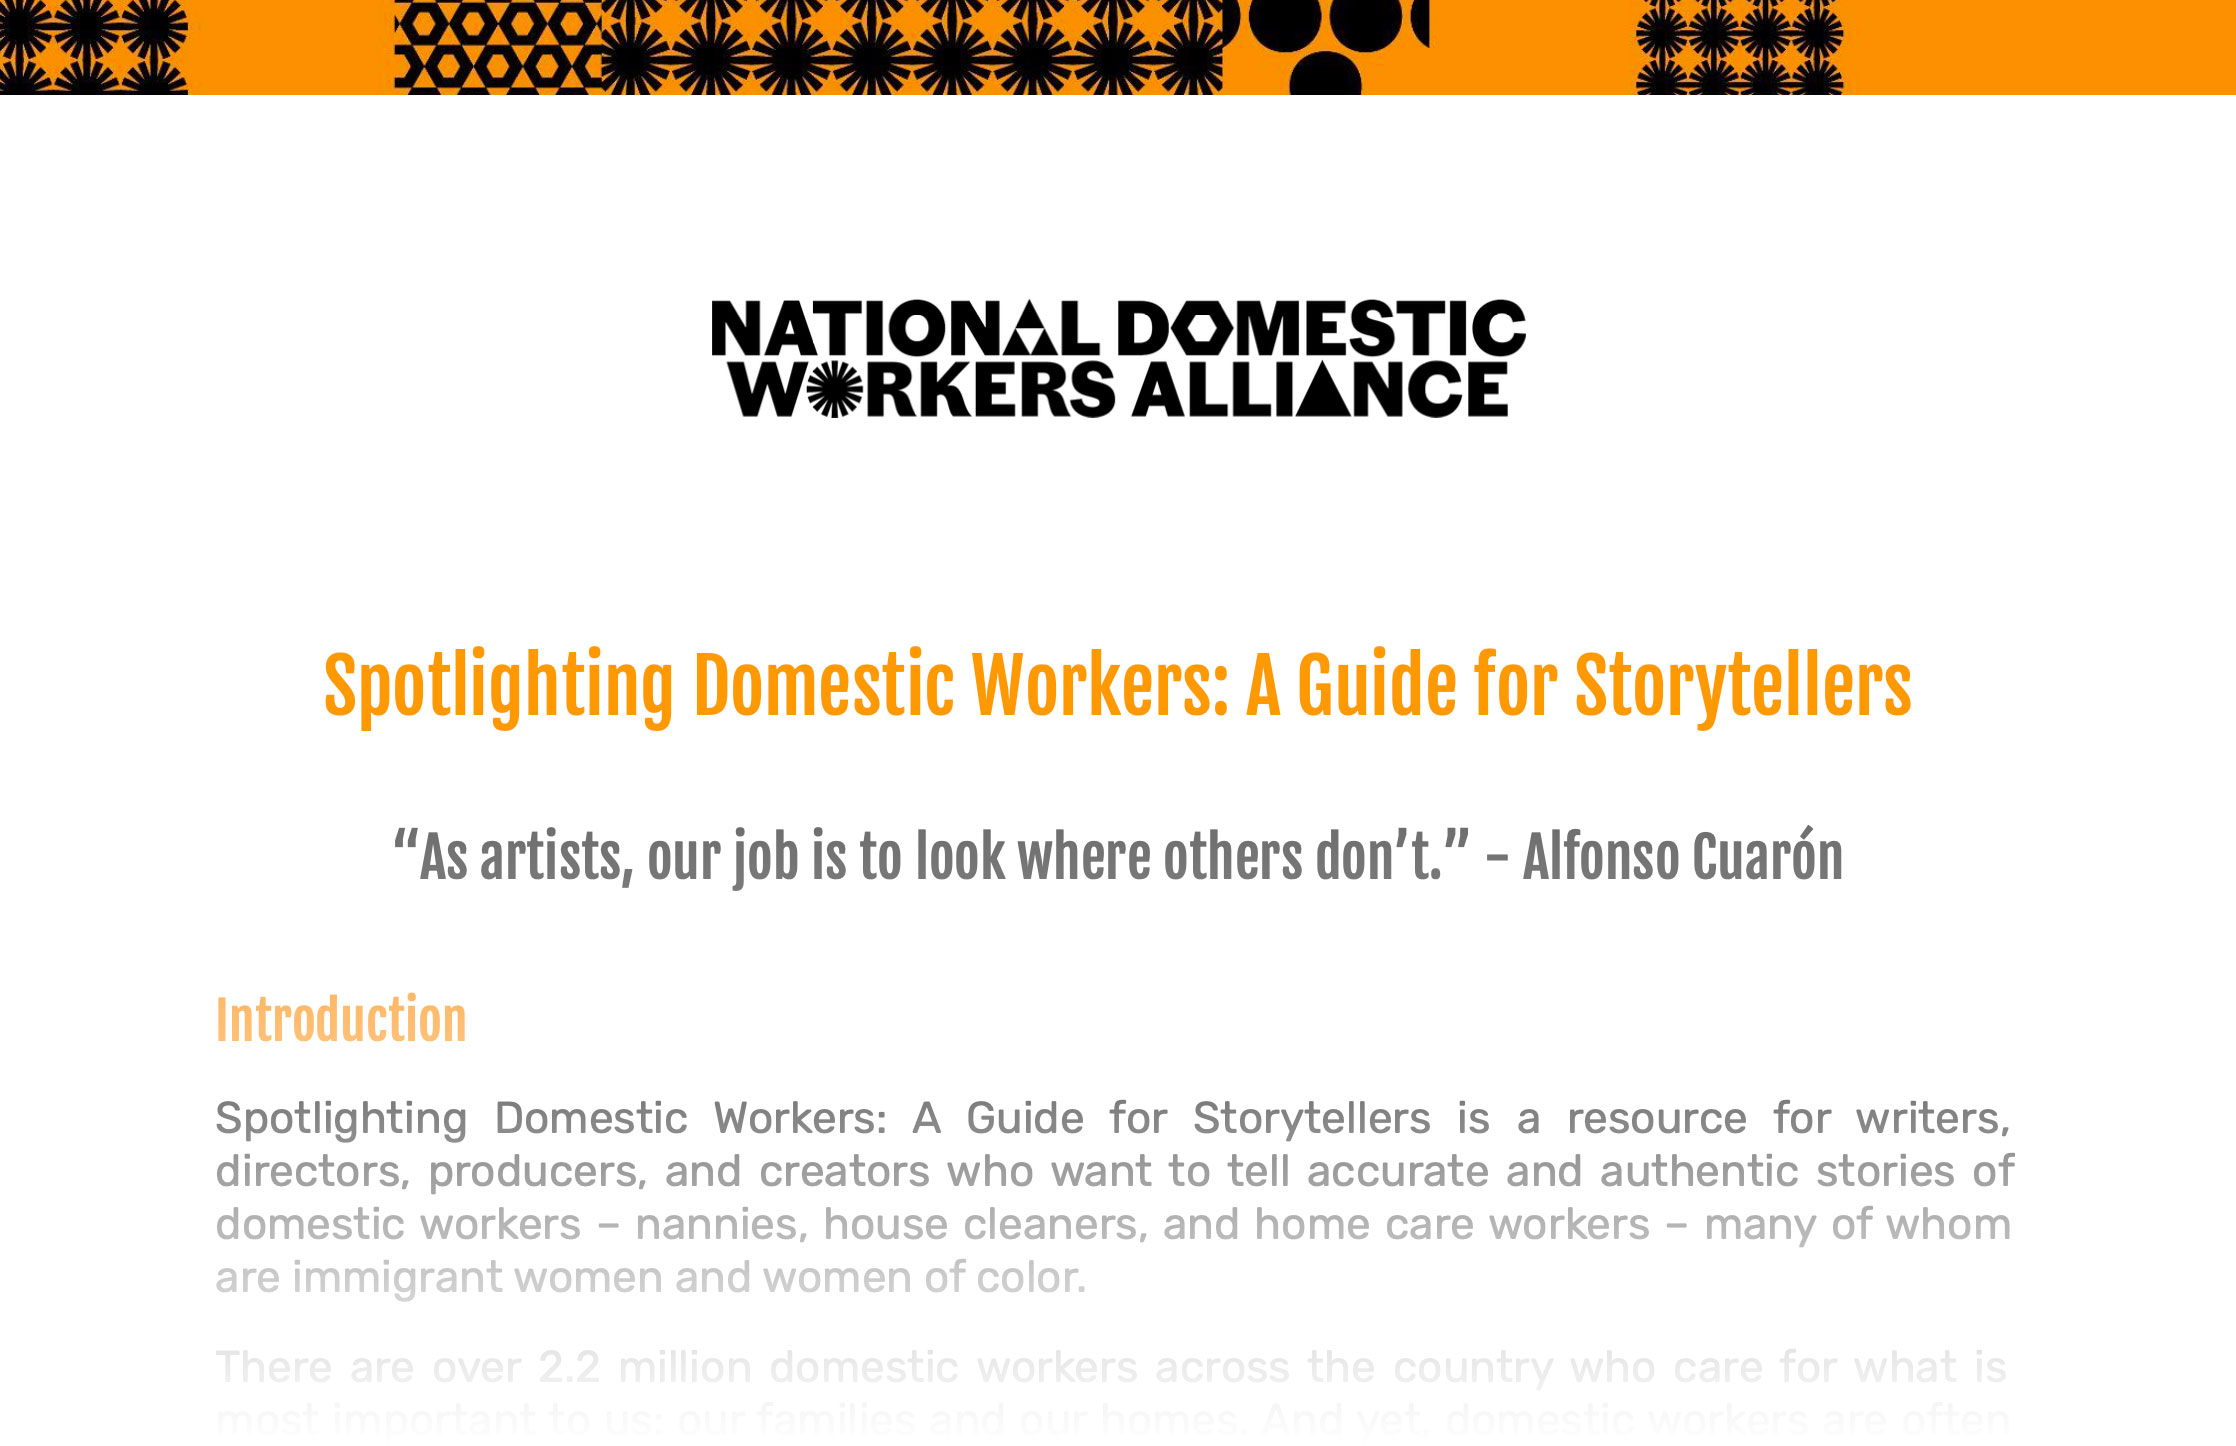 First Page of the Spotlighting Domestic Workers: A Guide for Storytellers